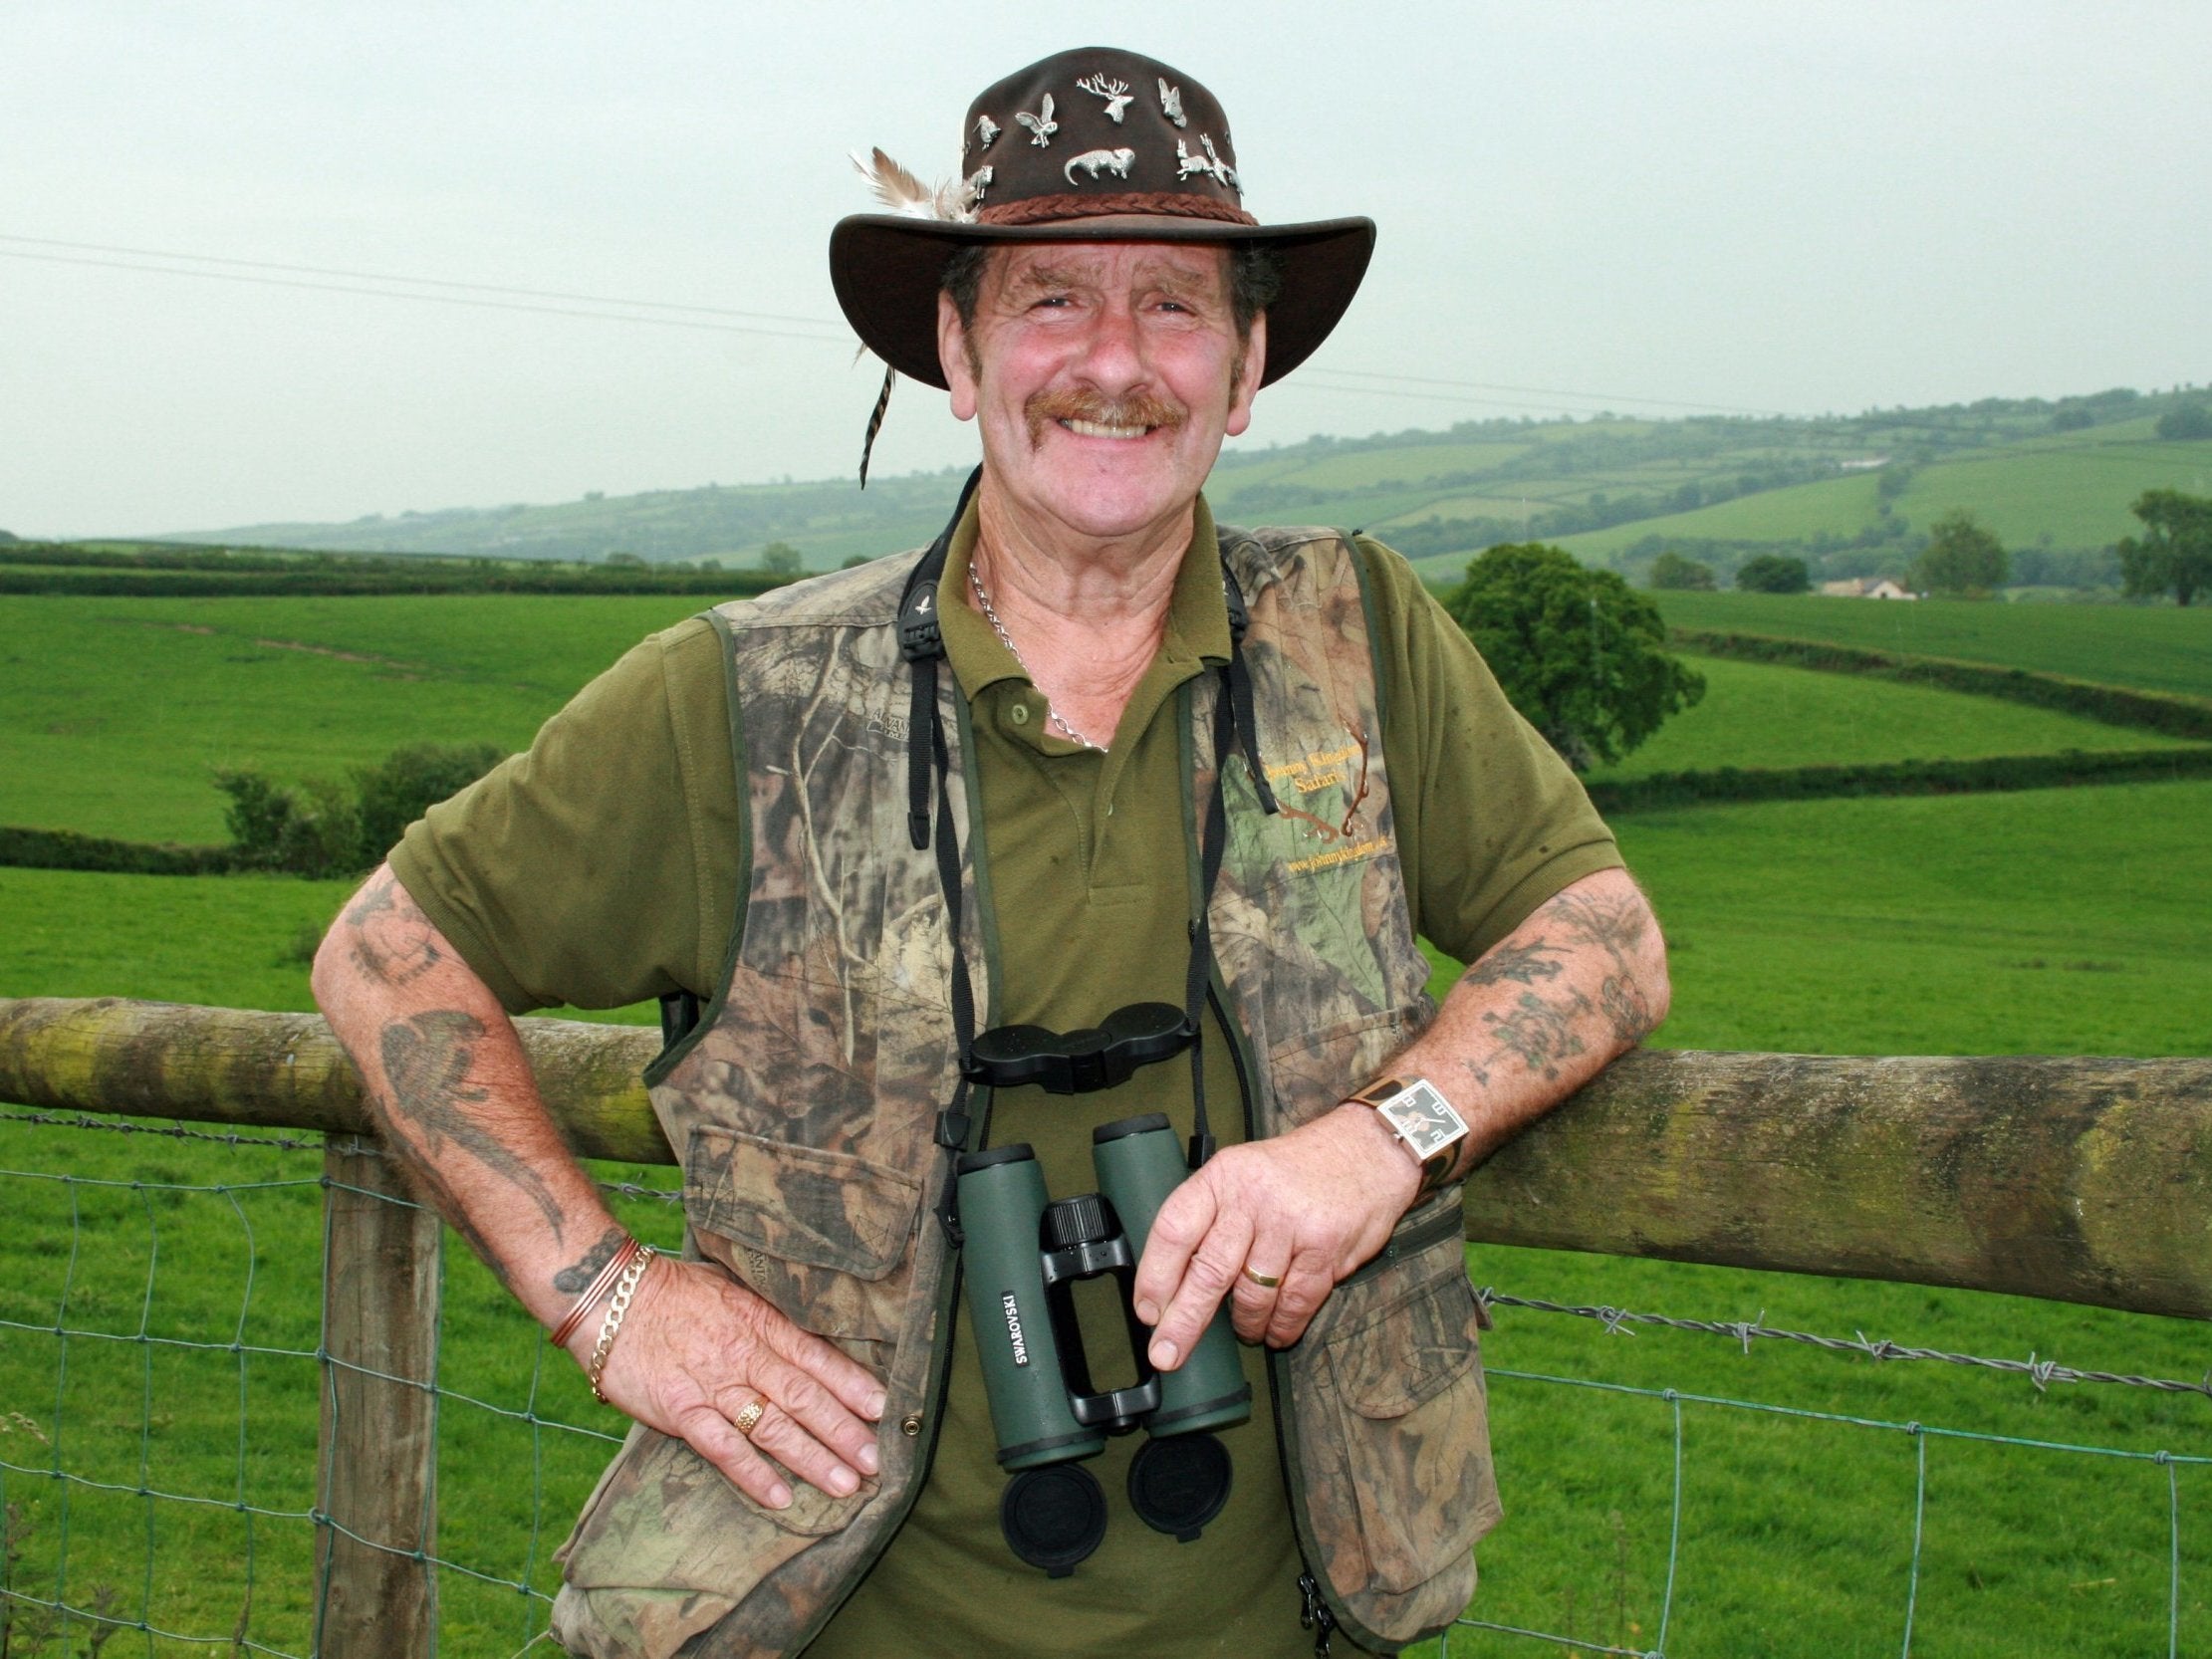 Johnny Kingdom specialised in his local area of Exmoor and north Devon